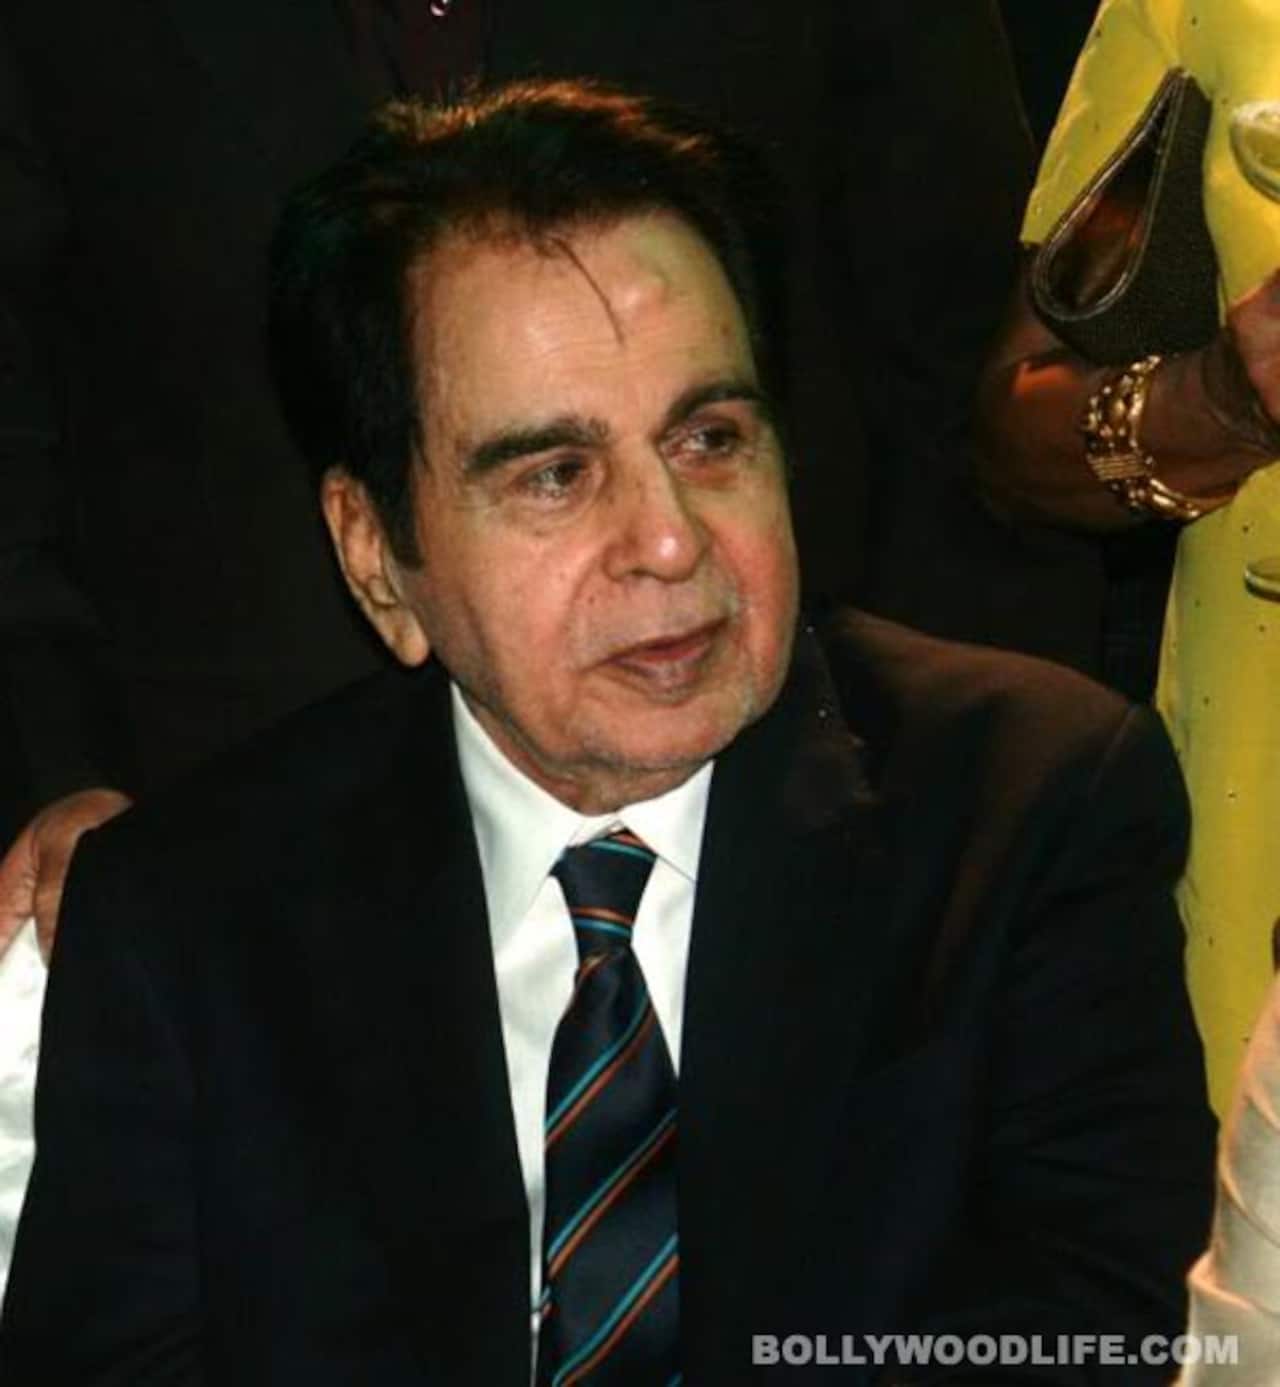 Just in! Dilip Kumar hospitalised for difficulty in breathing; doctors assure there is nothing to worry